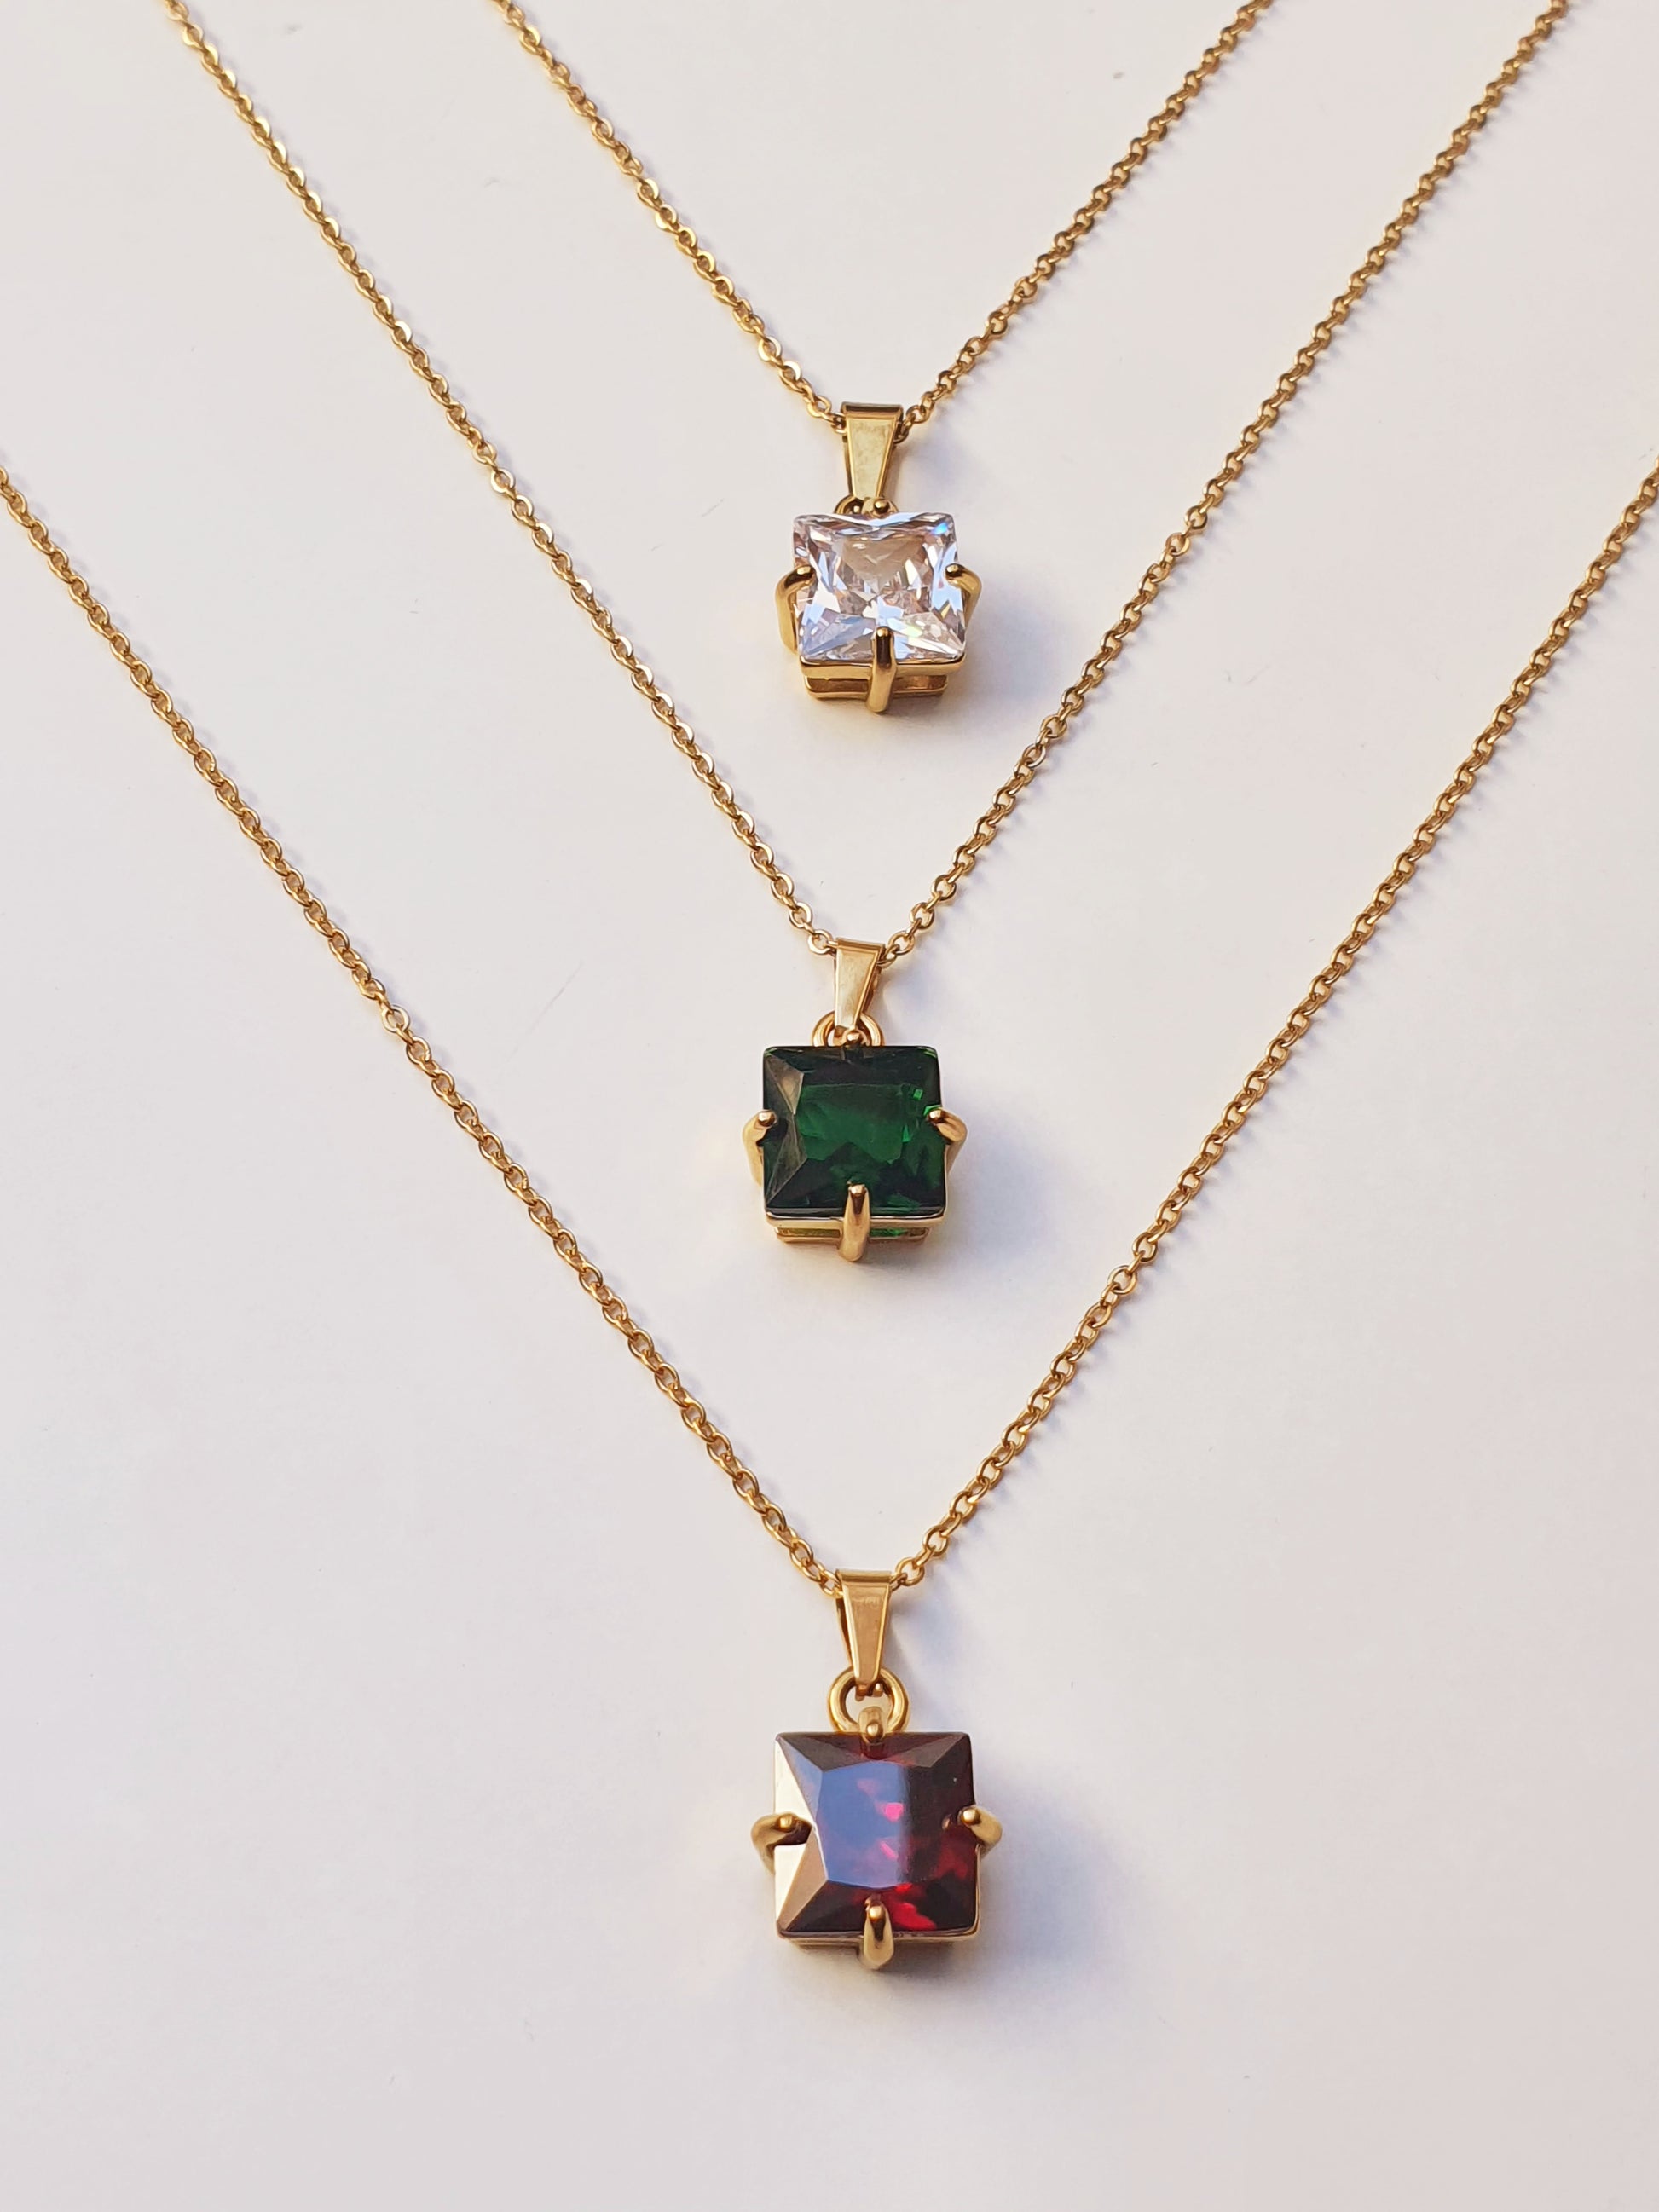 Three gold necklaces with square crystal pendants laid flat. One crystal is clear, another is  a deep green and the last is red